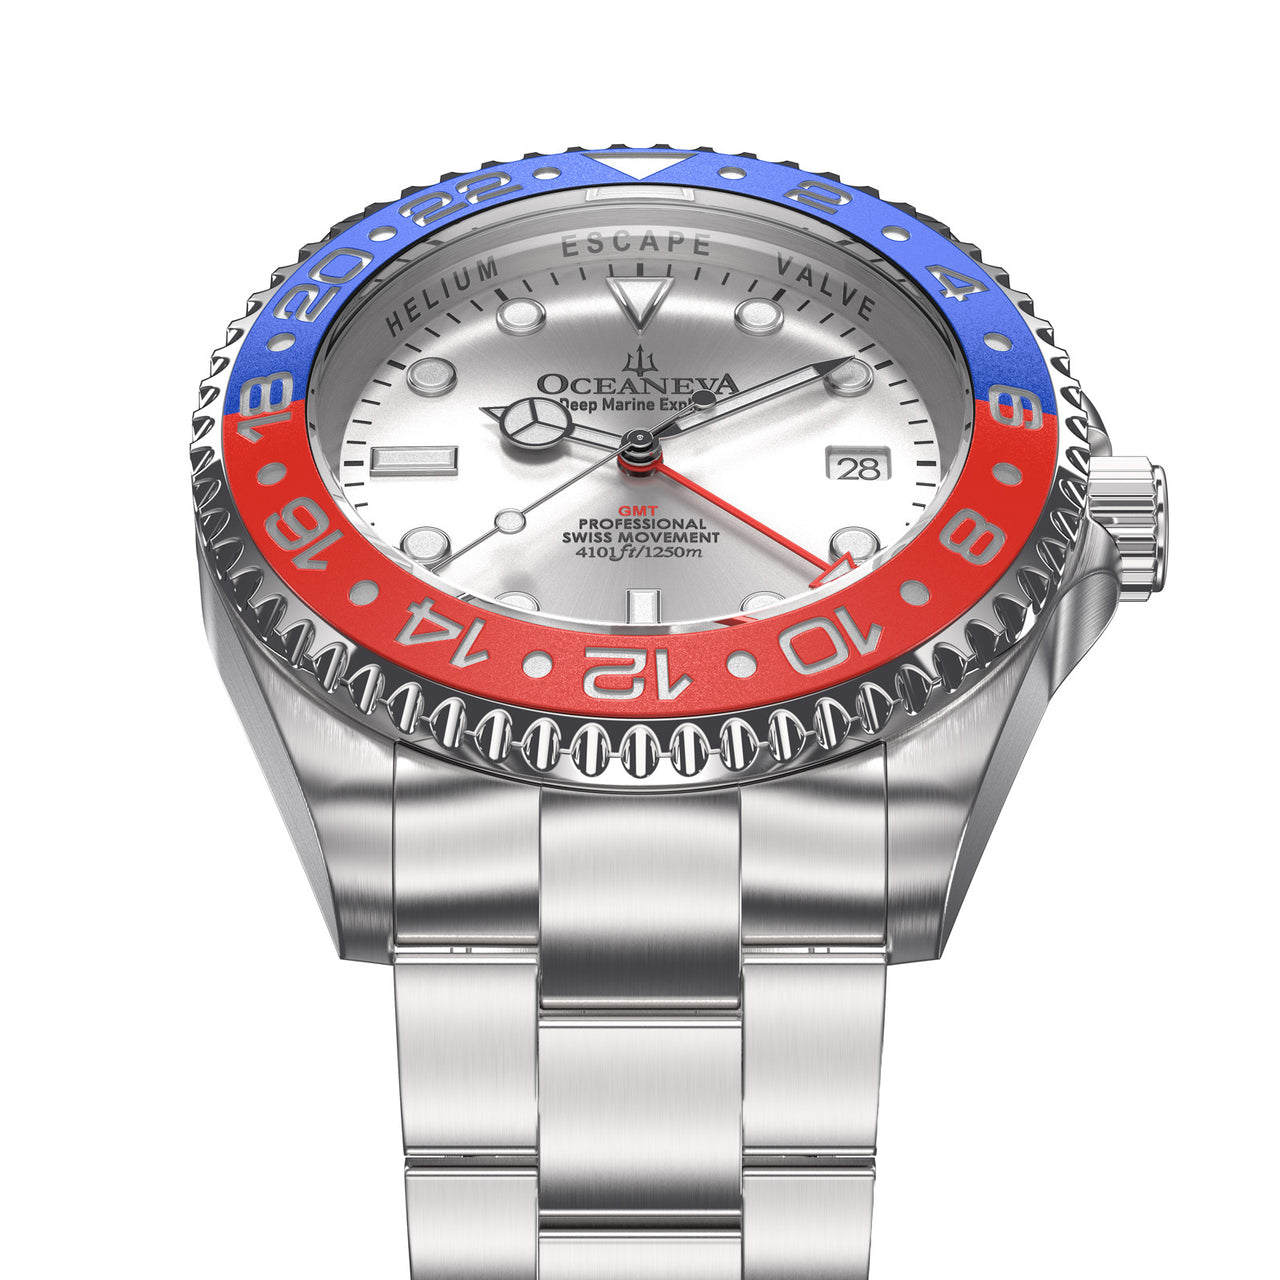 Oceaneva 1250M GMT Dive Watch Silver Blue And Red Frontal View Picture